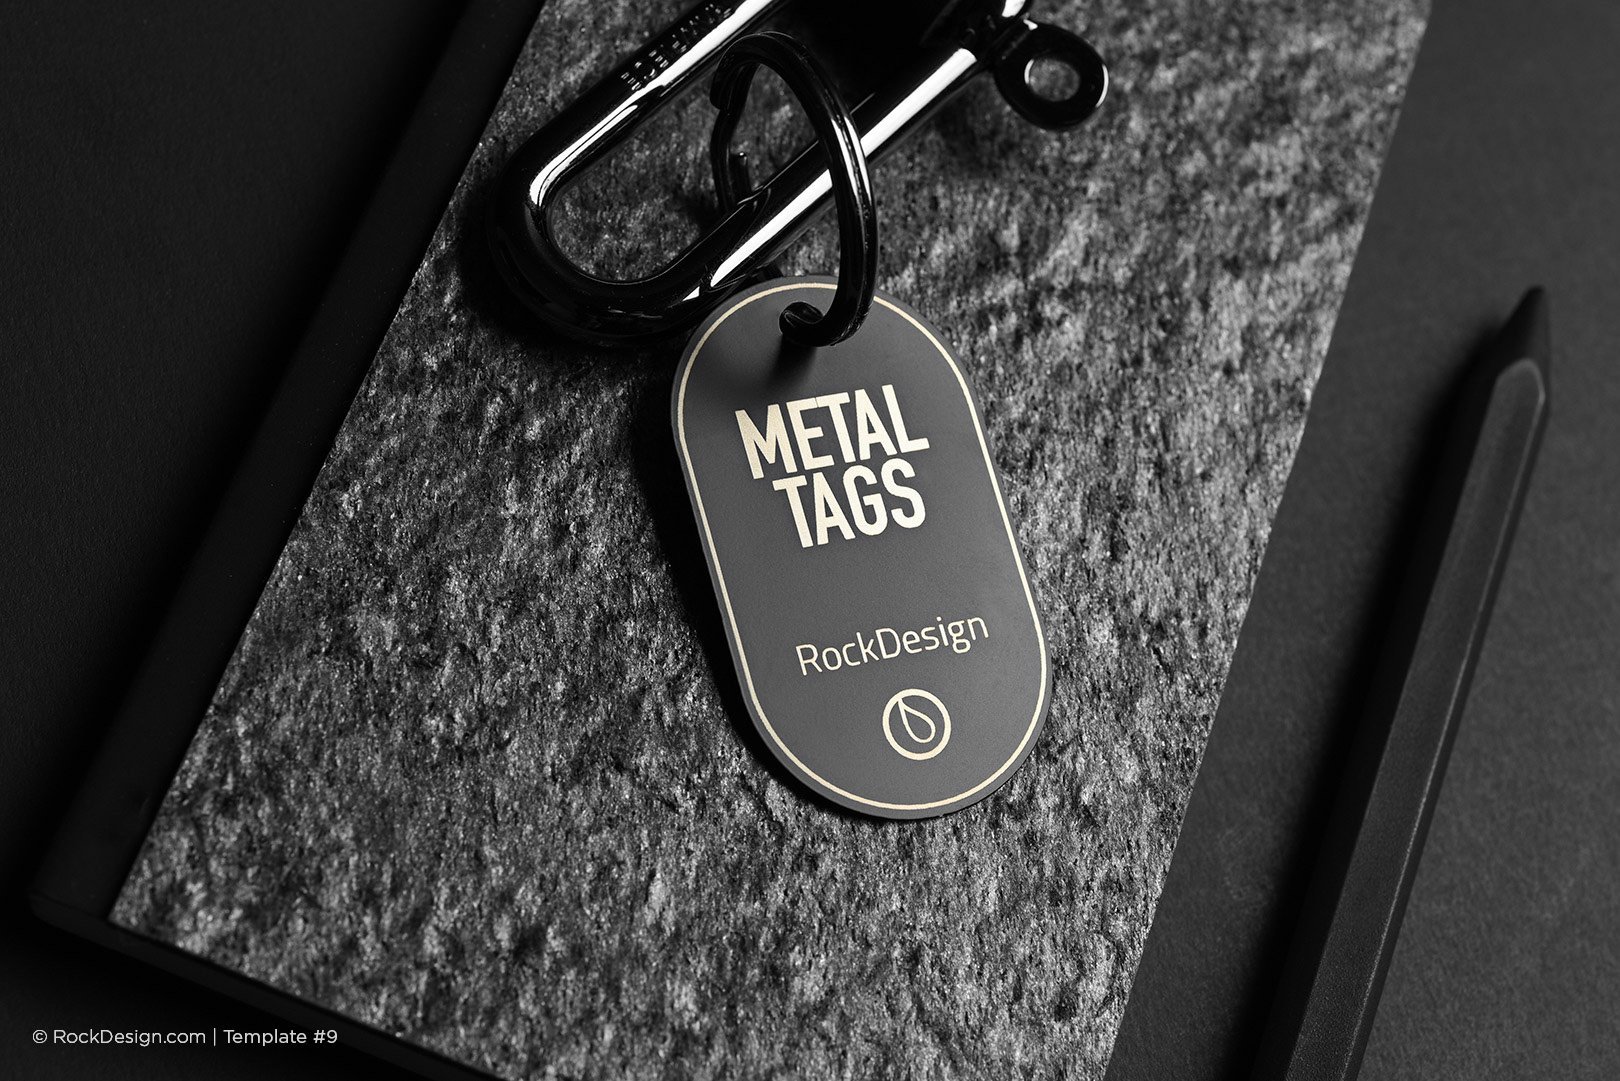 STAINLESS STEEL INDUSTRIAL ID TAG WITH FREE LASER ENGRAVING